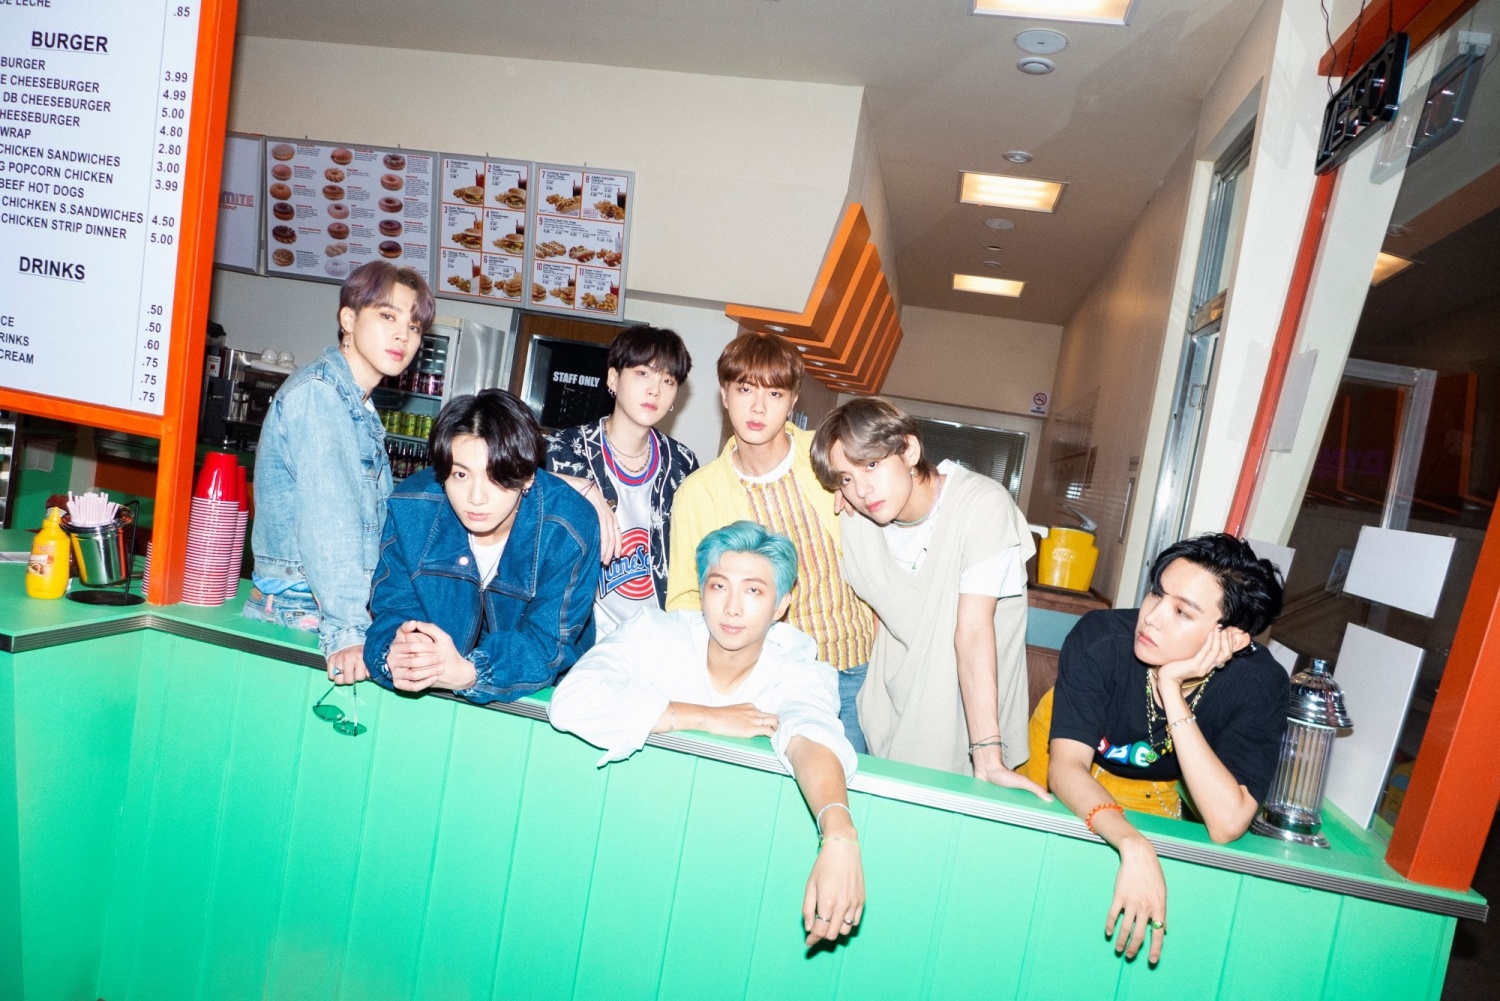 BTS "'Dynamite', a song dedicated to those in need"